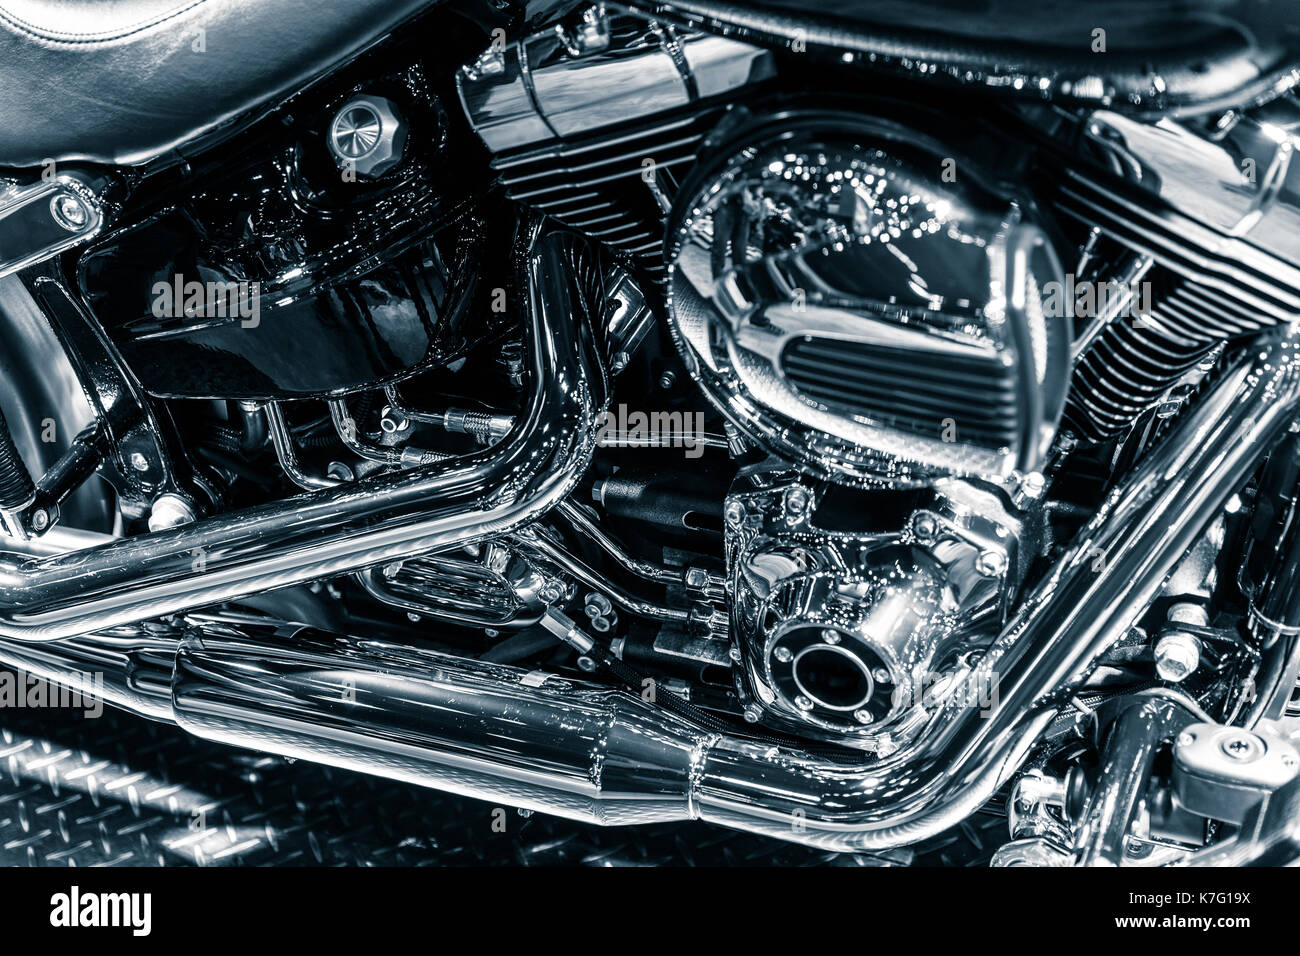 Motorcycle chromium engine exhaust pipes art photography in black and white vintage tone Stock Photo